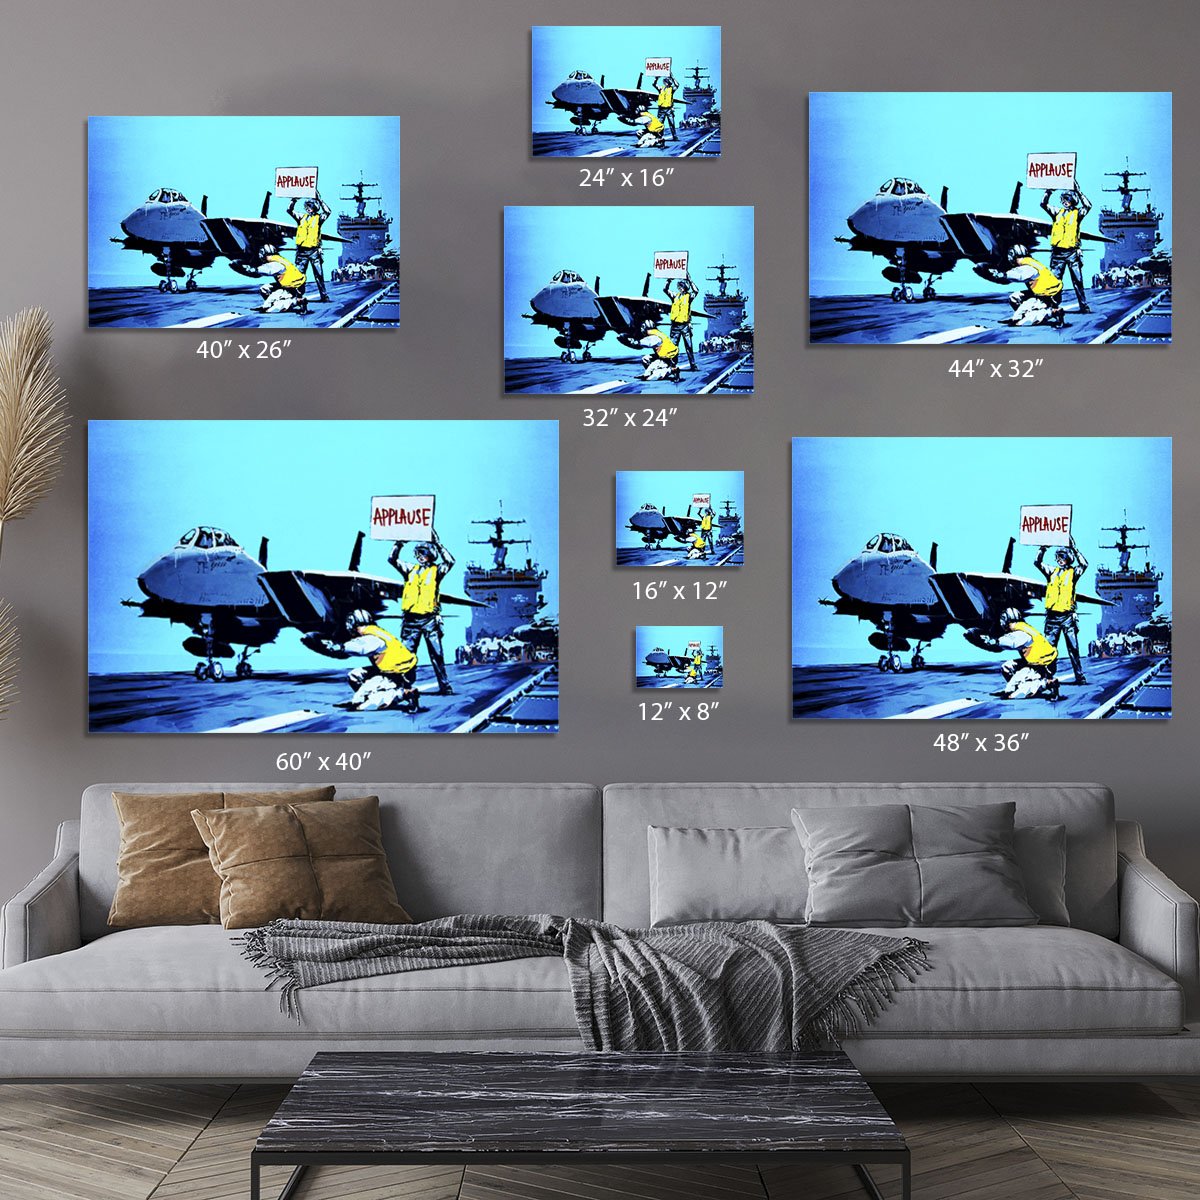 Banksy Aircraft Carrier Applause Canvas Print or Poster